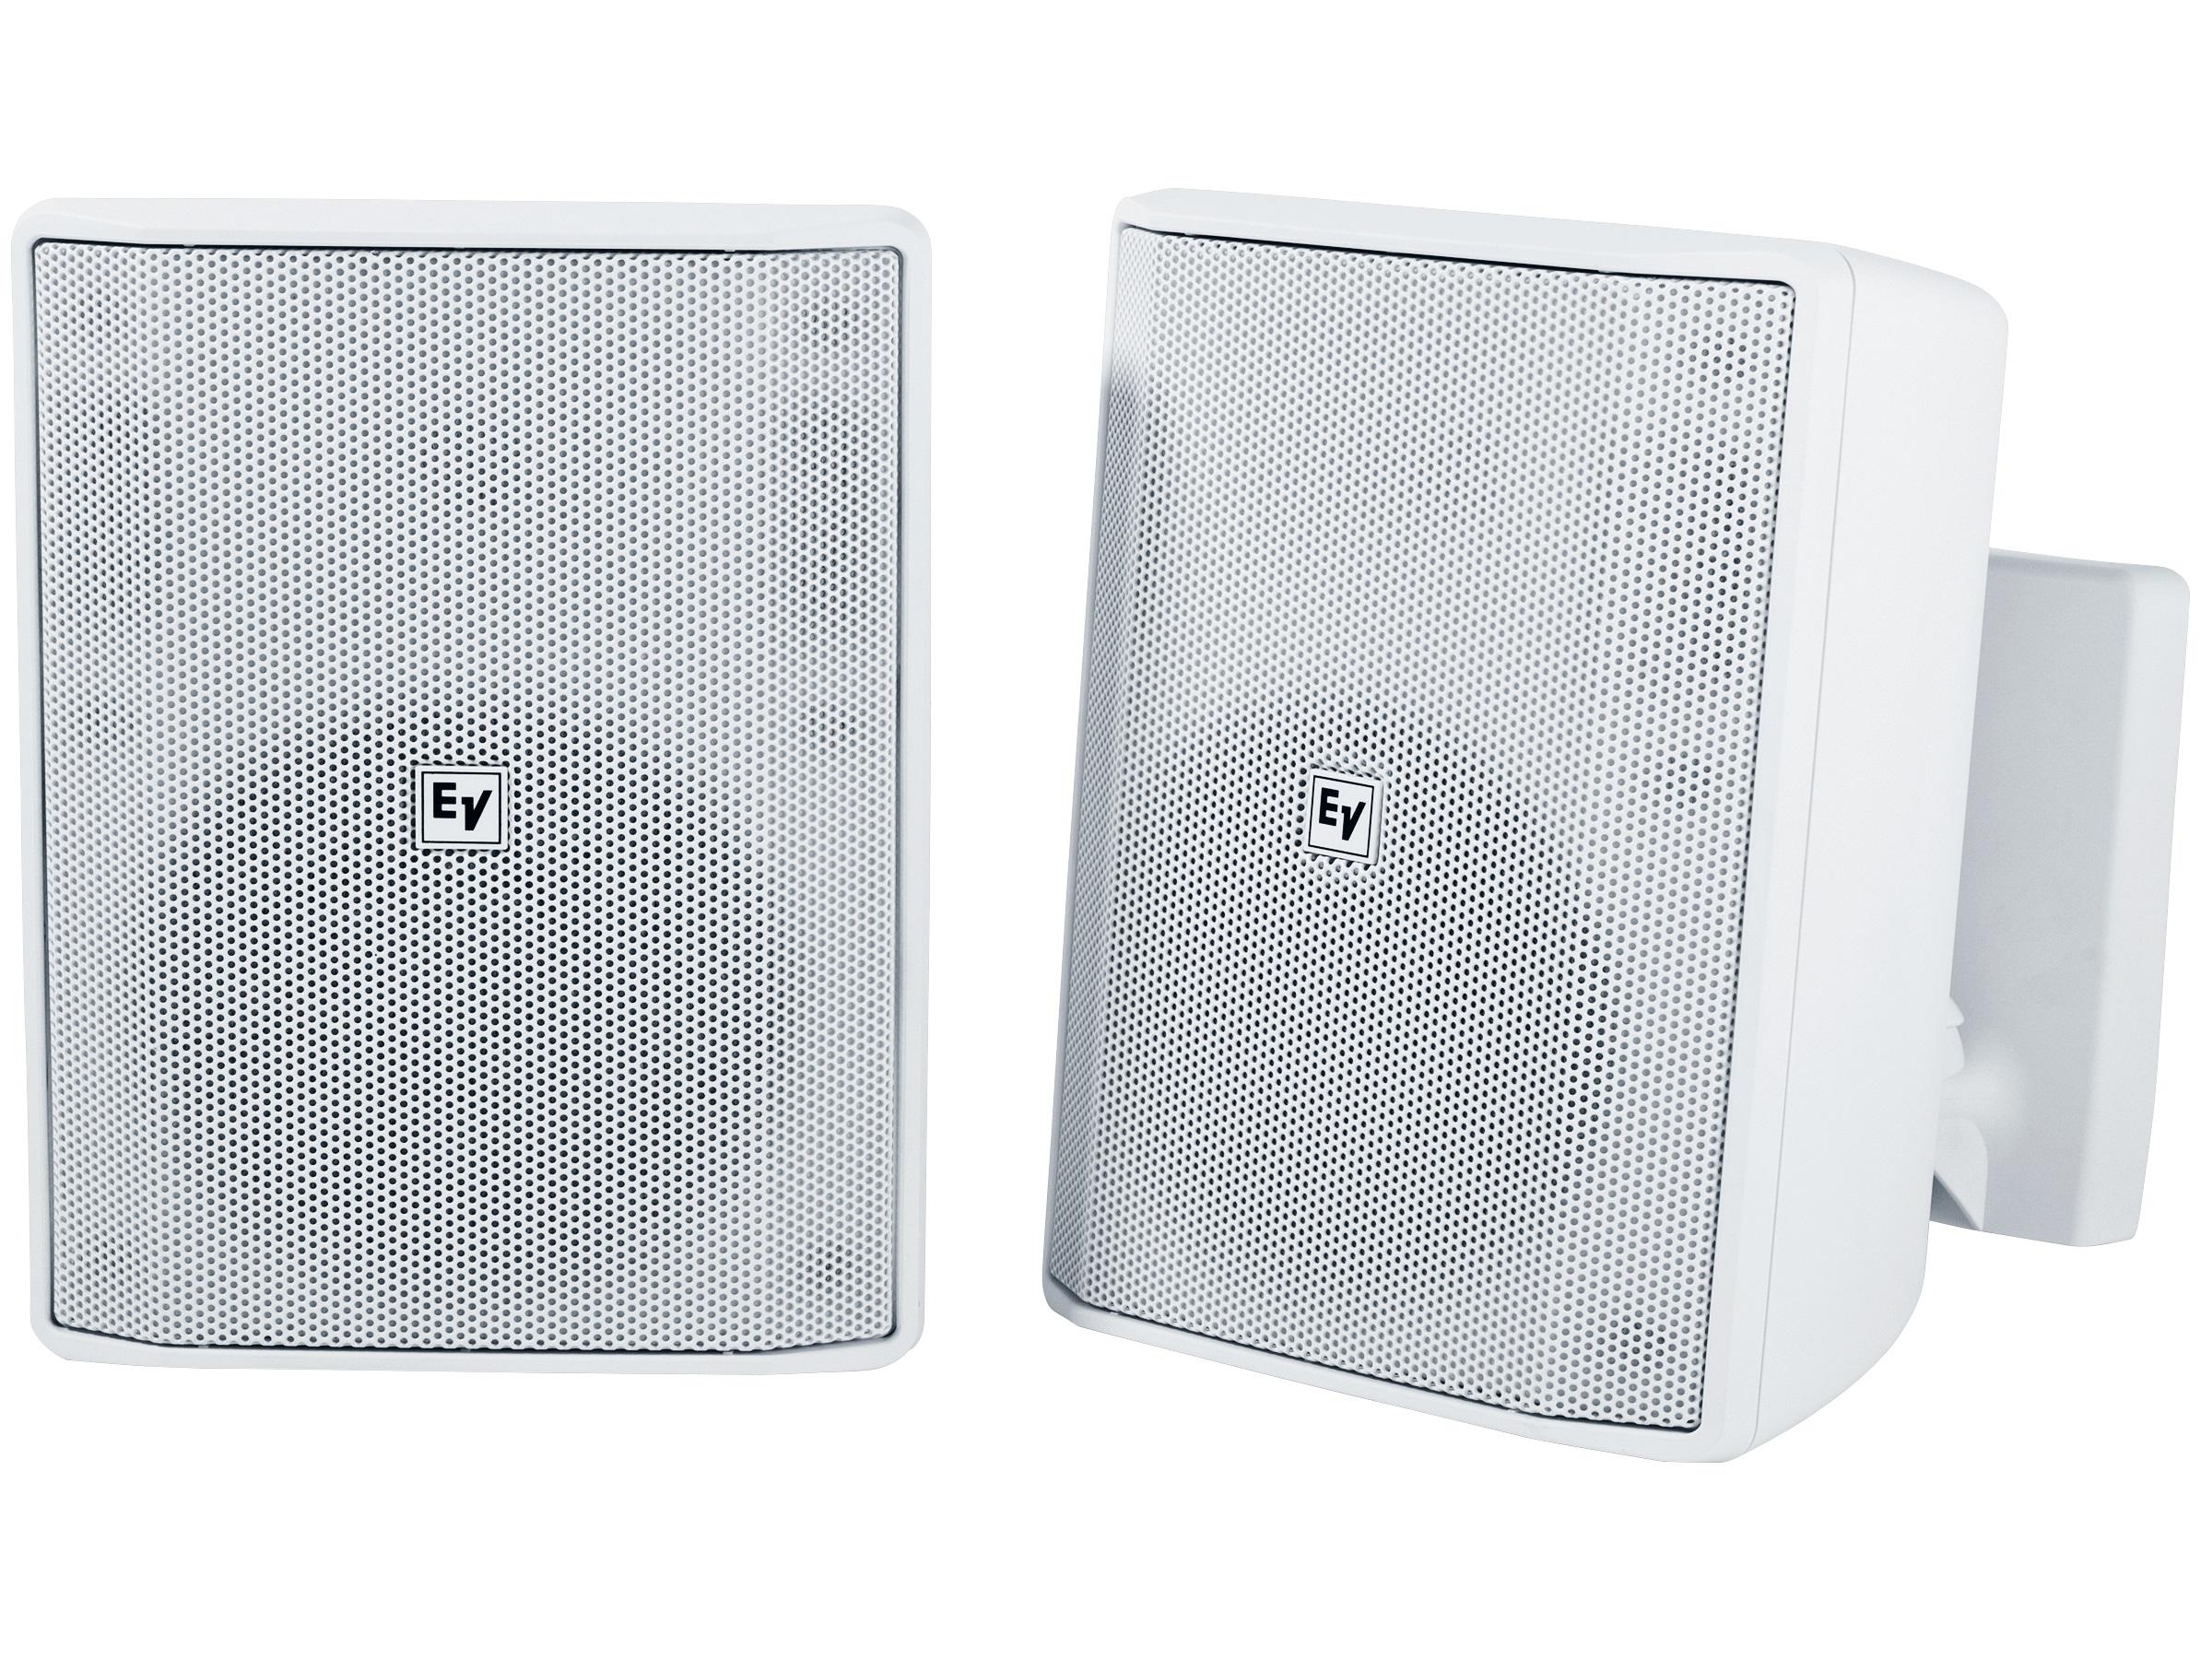 EVIDS5.2TW 5 inch 70/100V Speaker Cabinet (White/Pair) by Electro-Voice